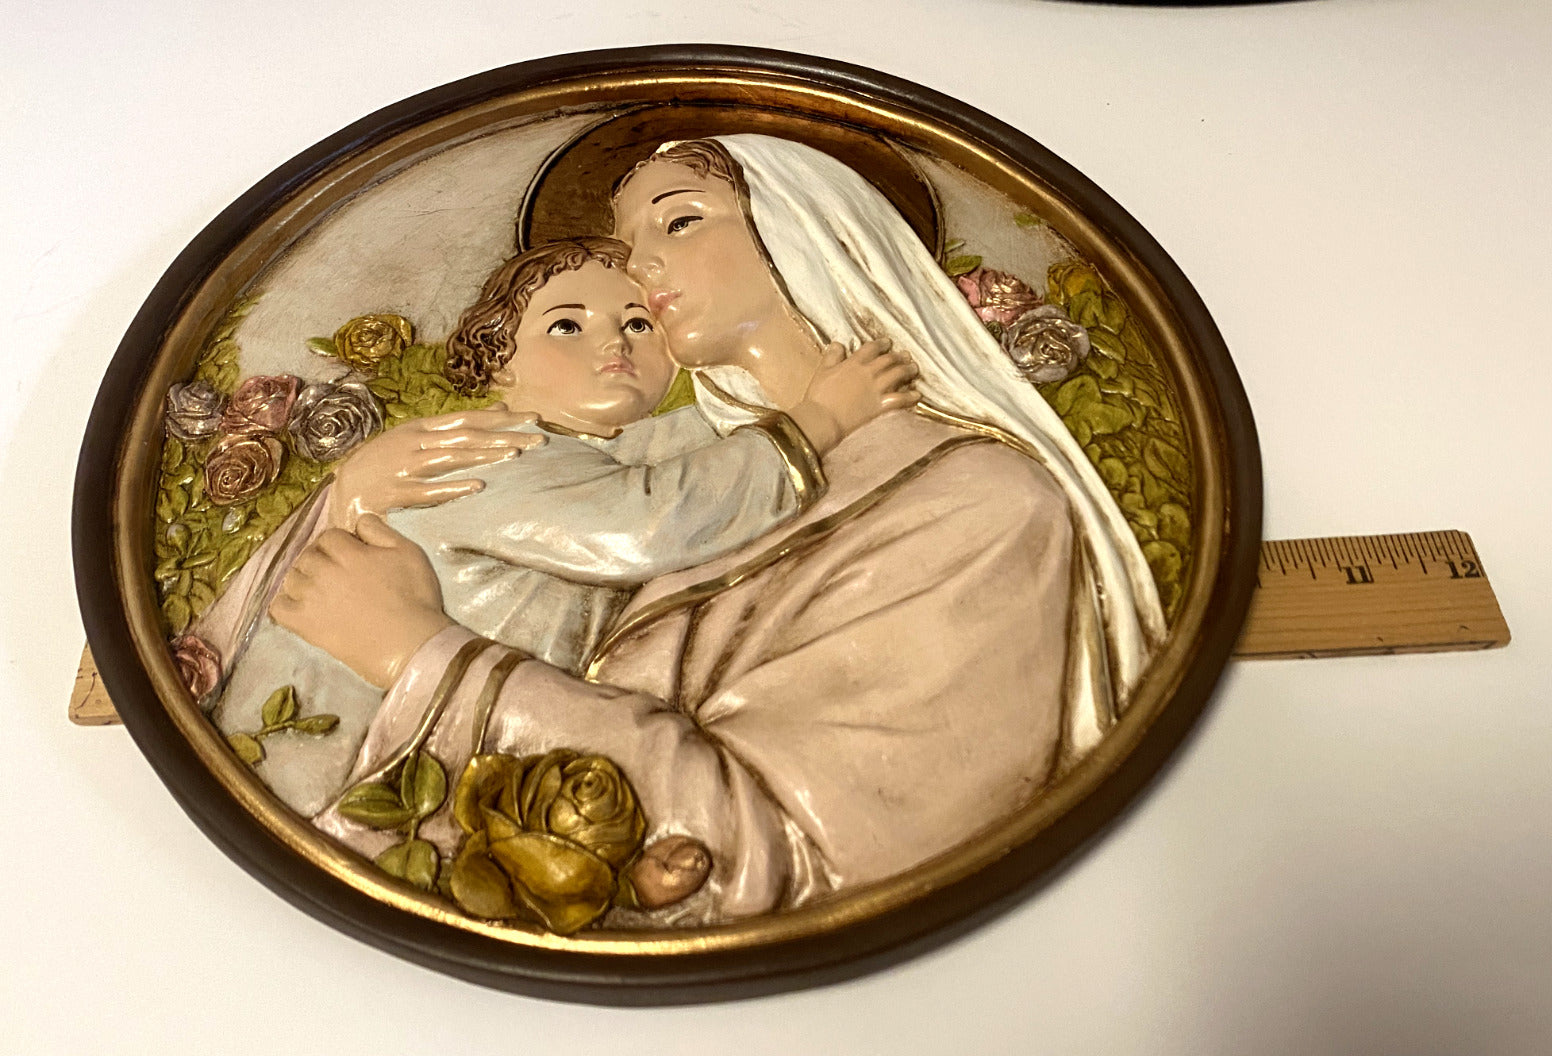 Blessed Mother & Child Jesus 10" Diam. Wall Plaque, New from Colombia - Bob and Penny Lord